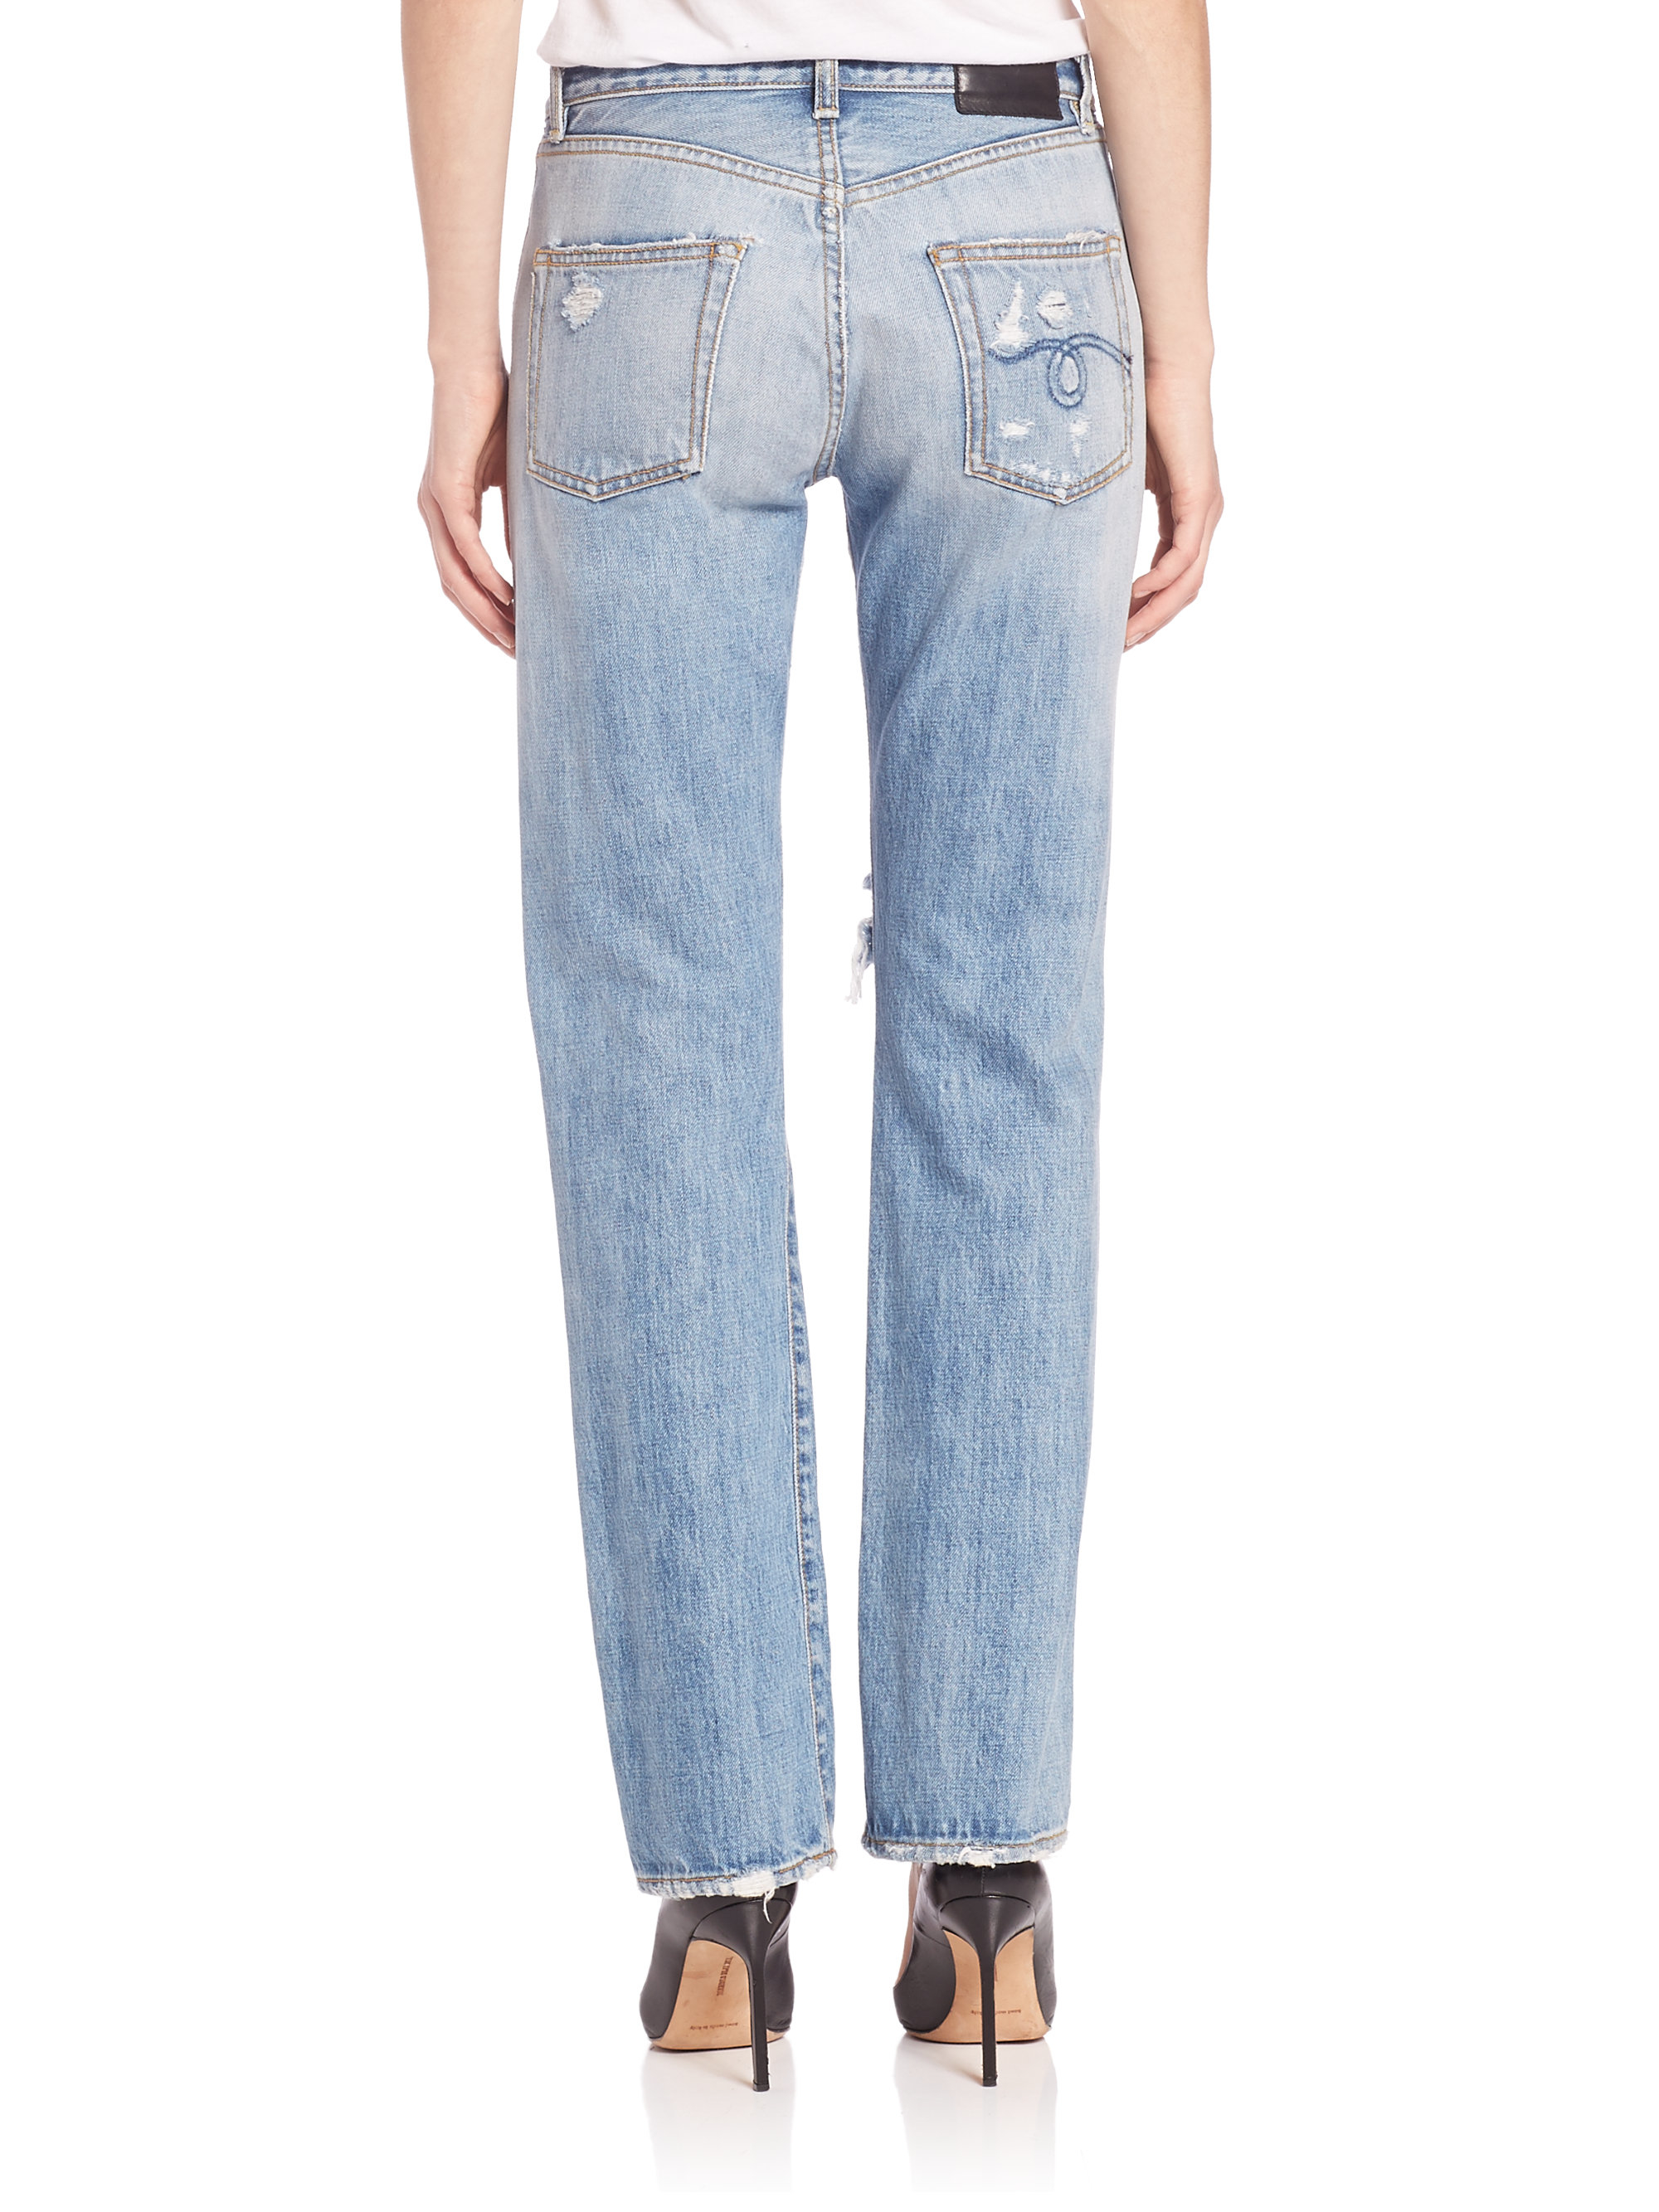 Lyst - R13 High-rise Distressed Straight-leg Jeans in Blue